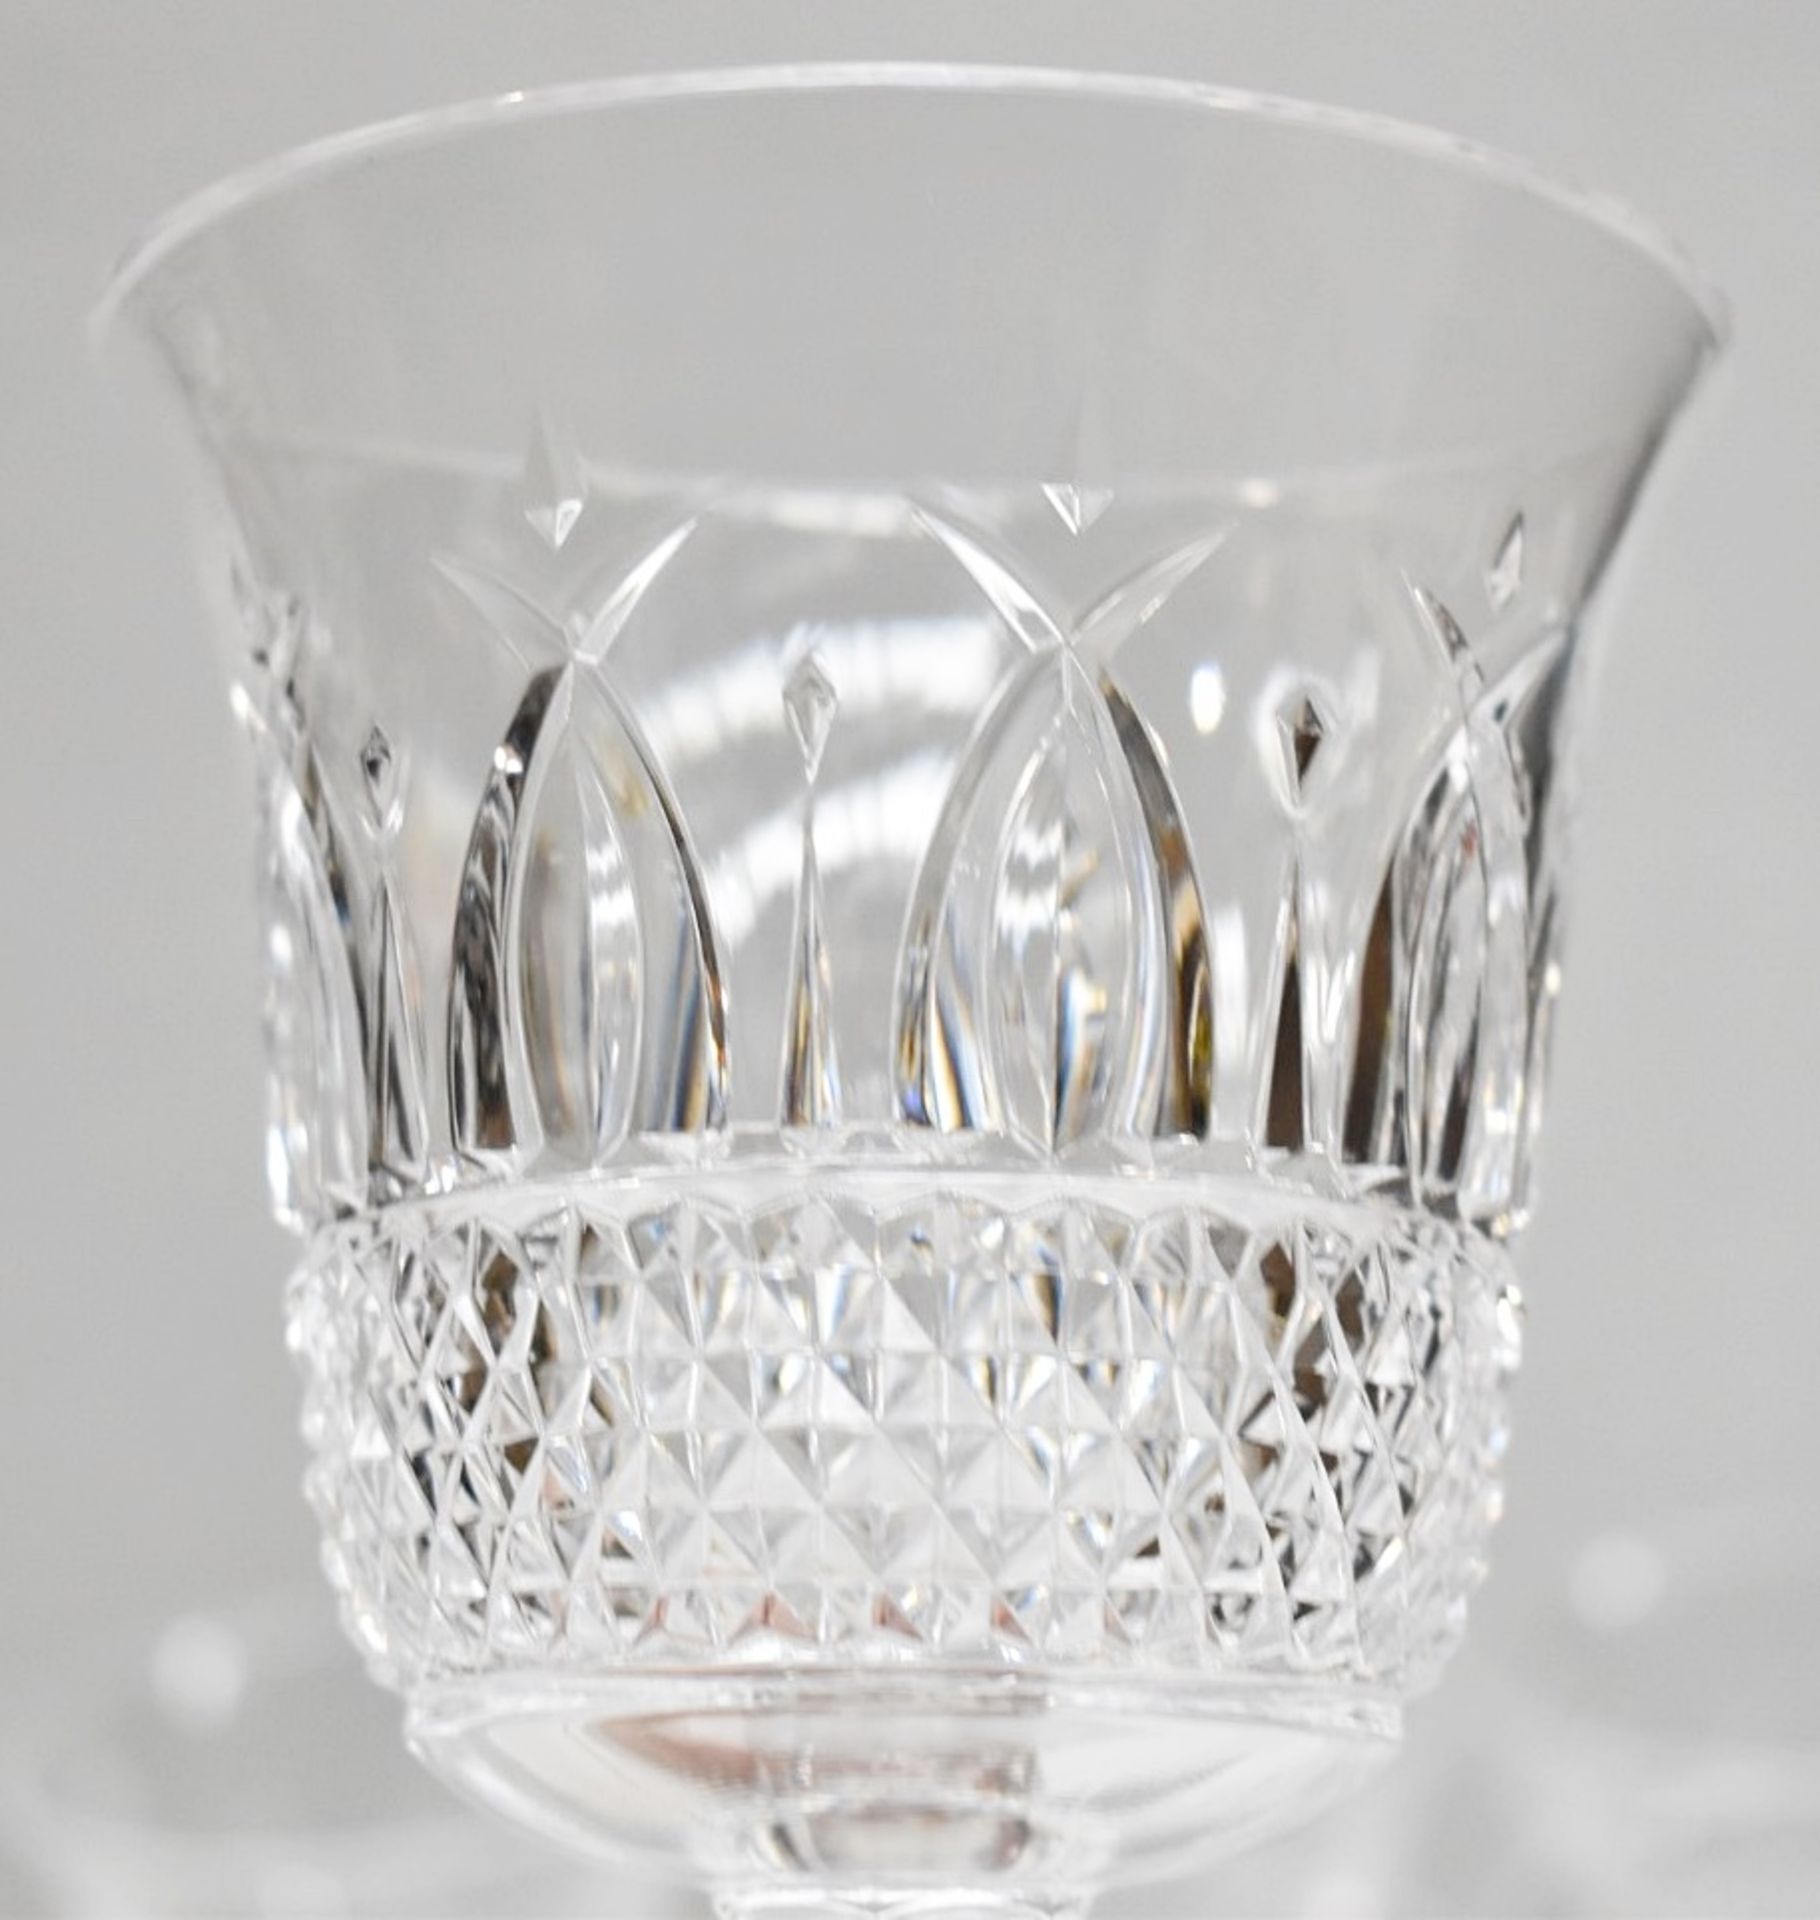 Set of 6 x MARIO LUCA GIUSTI 'Italia' Synthetic Clear Crystal Wine Glasses (180ml) - RRP £144.00 - Image 7 of 8